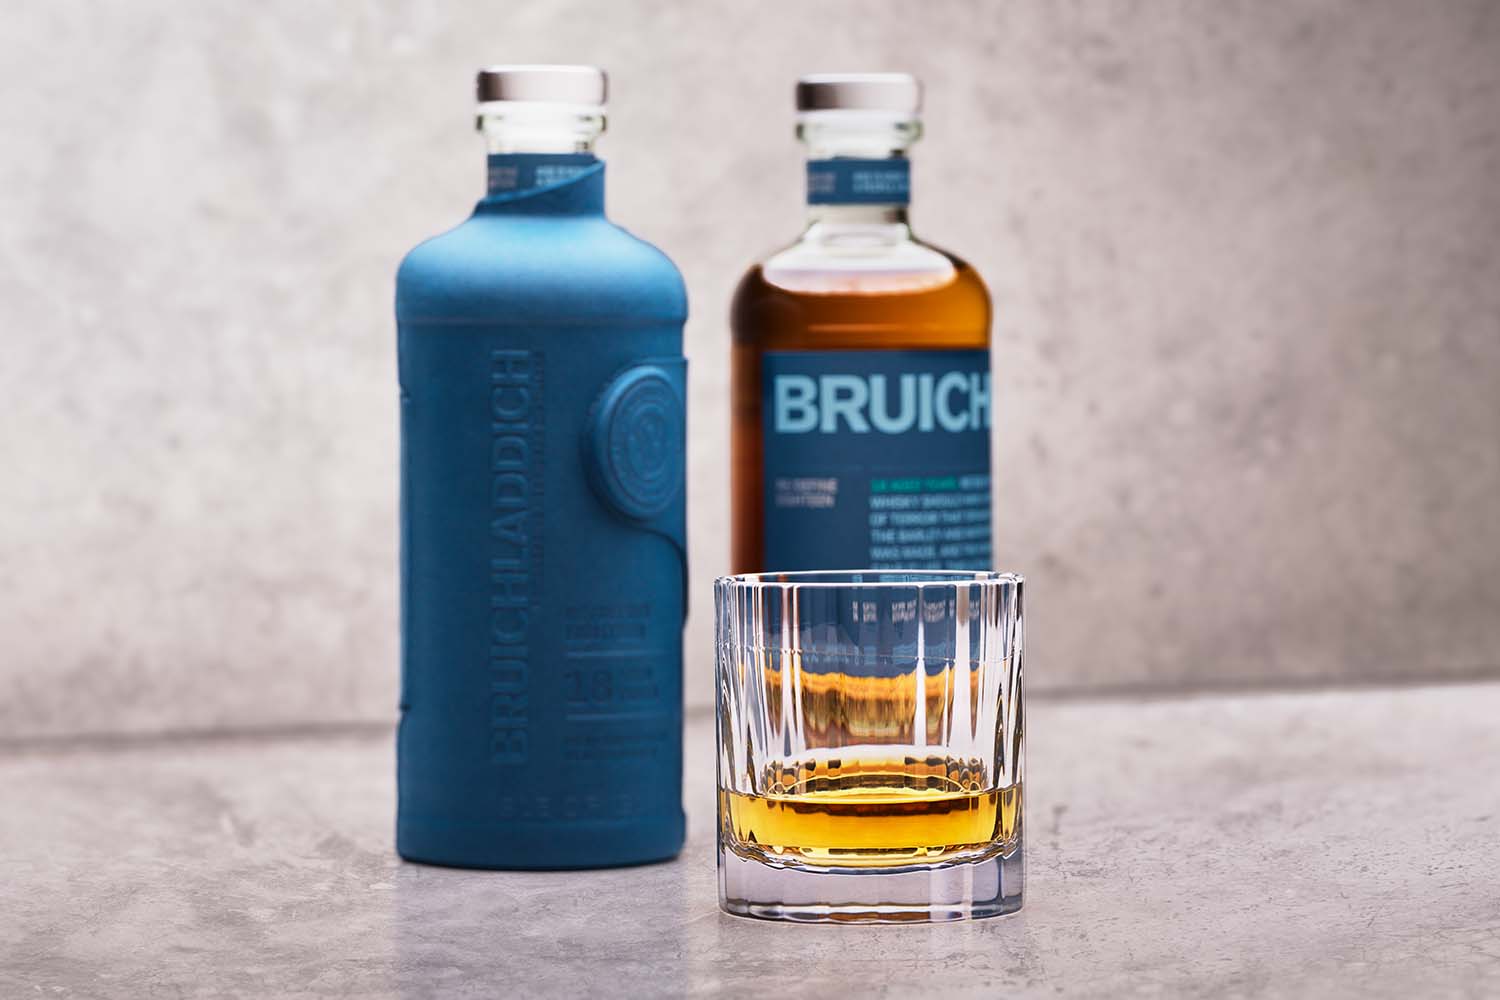 The new packaging for Bruichladdich's Luxury Redefined series